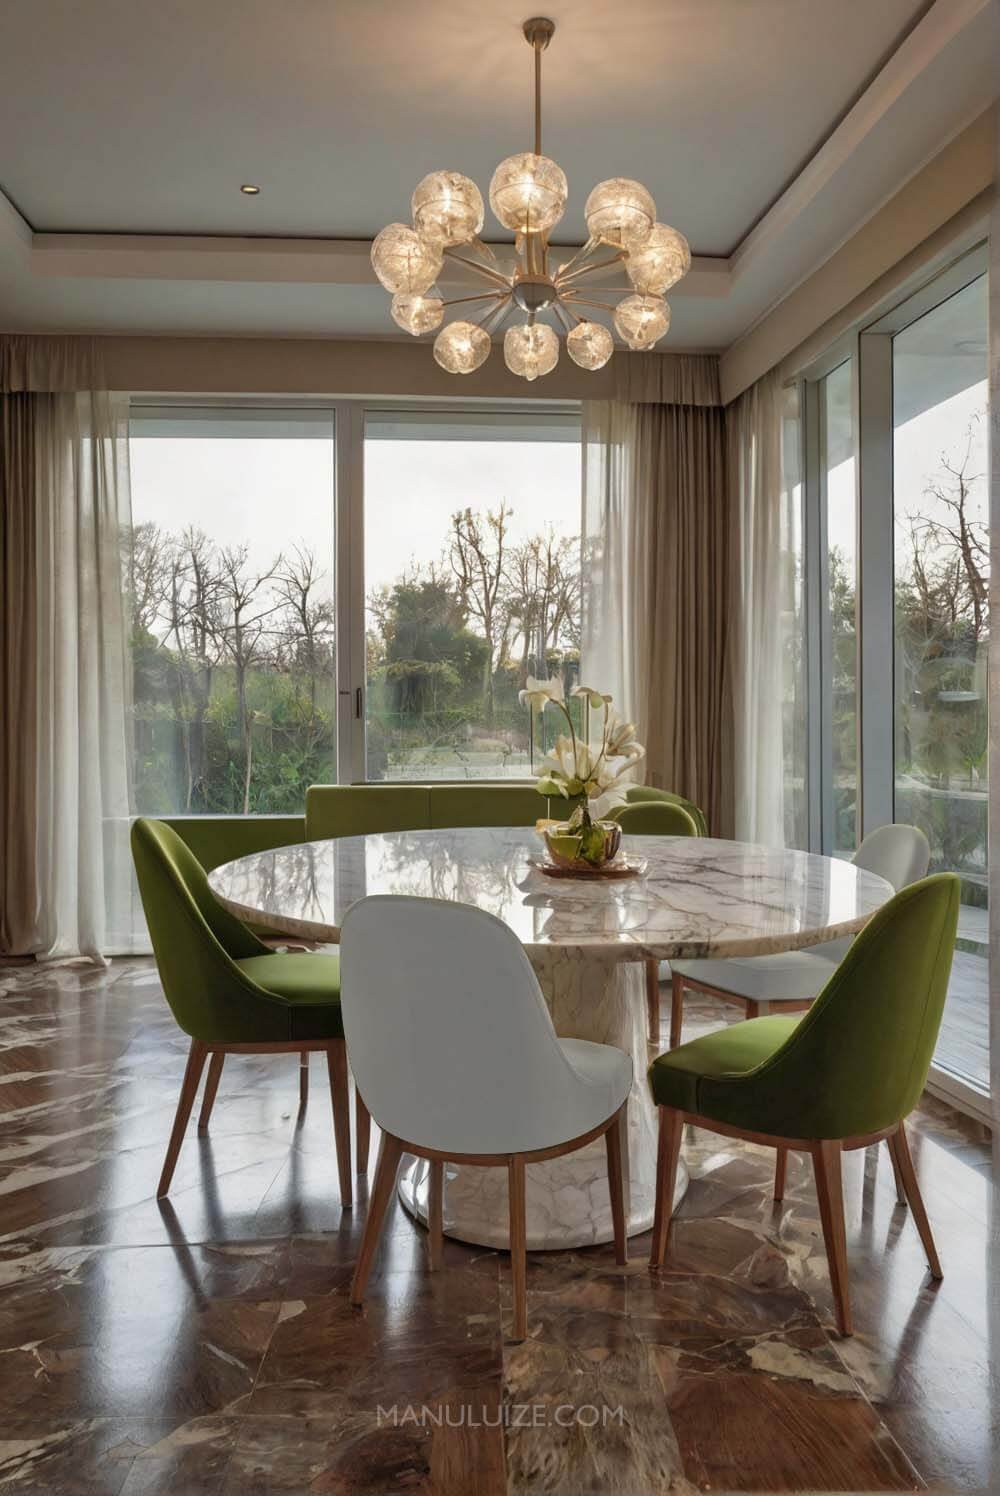 Dining room chairs decor